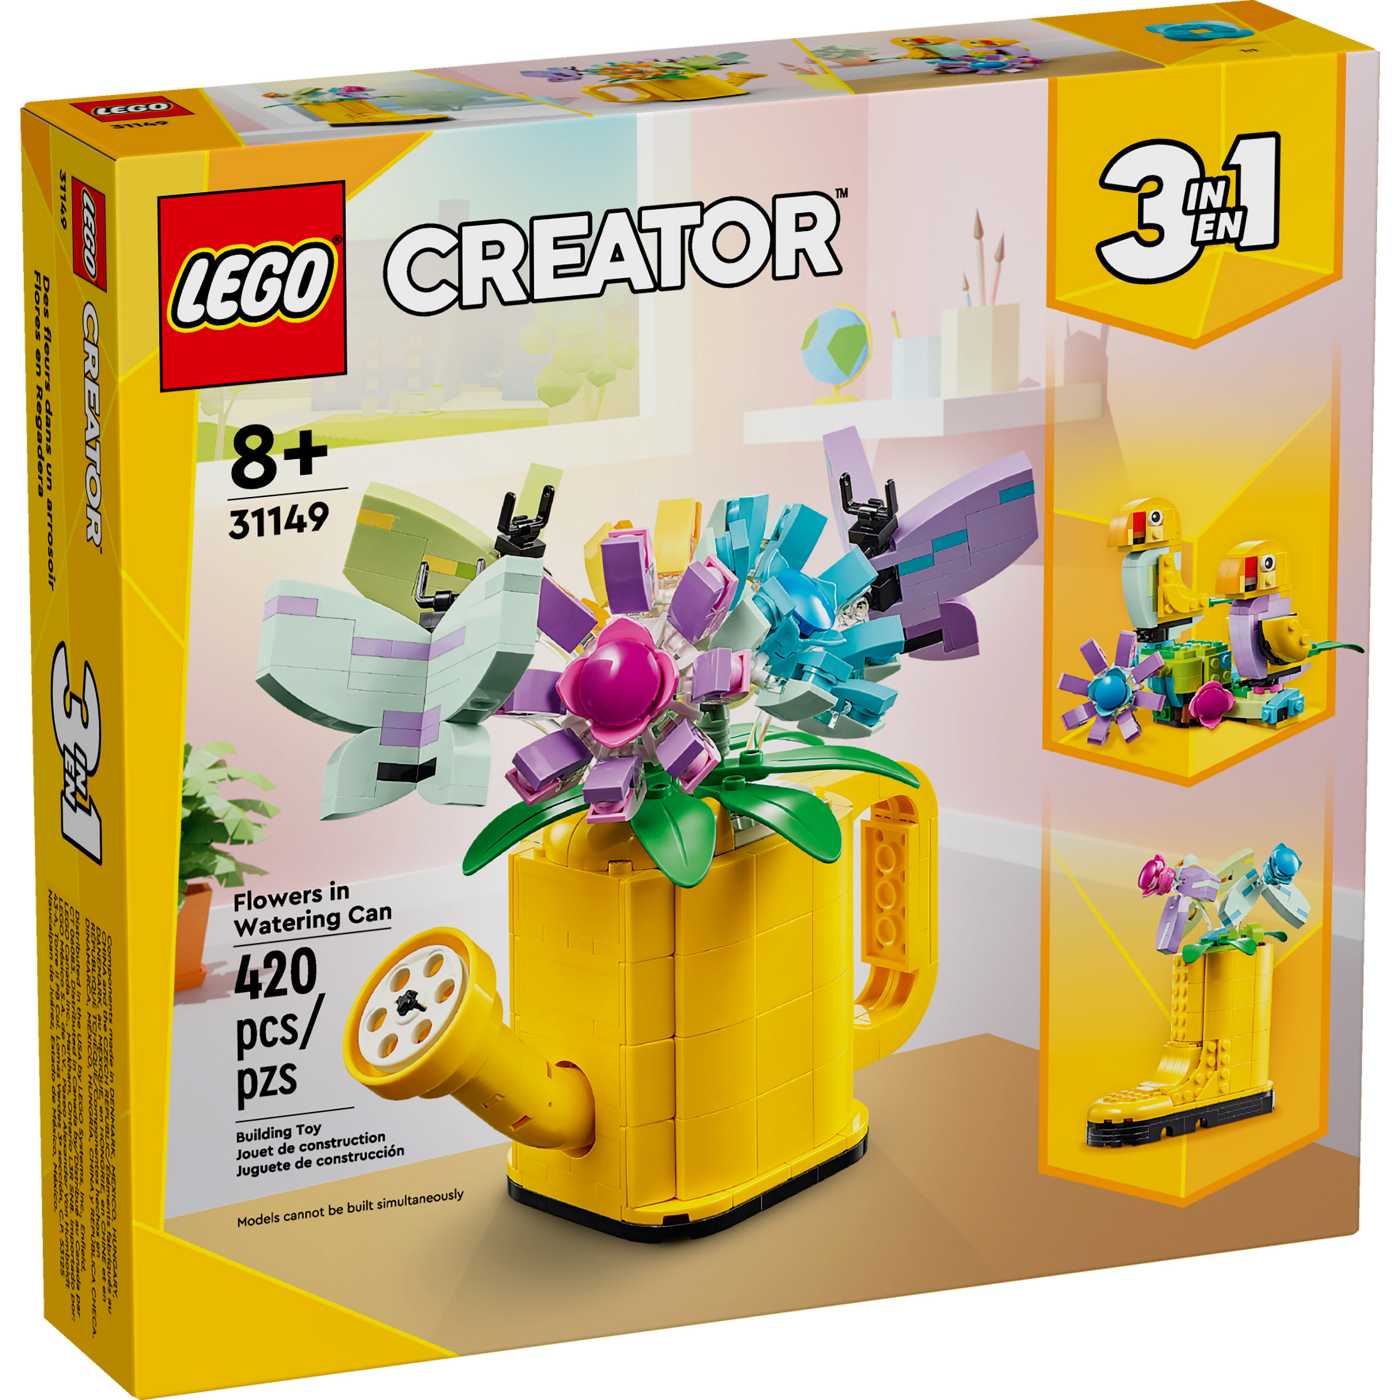 LEGO Creator 3-in-1 Flowers in Watering Can Set; image 1 of 2